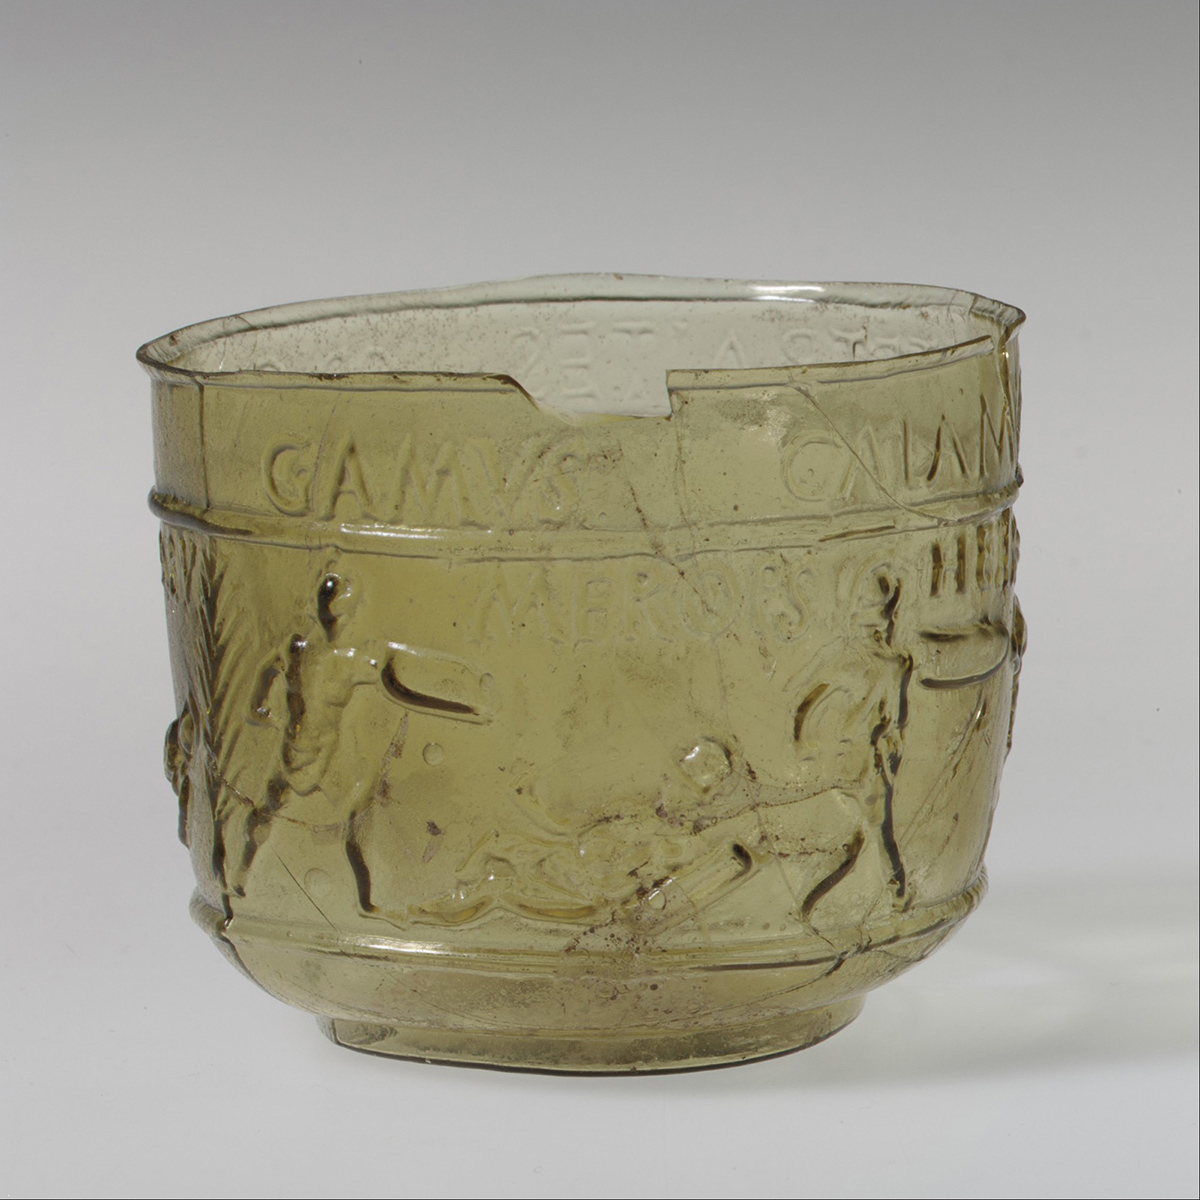 Photo of an ancient Roman gladiator’s cup